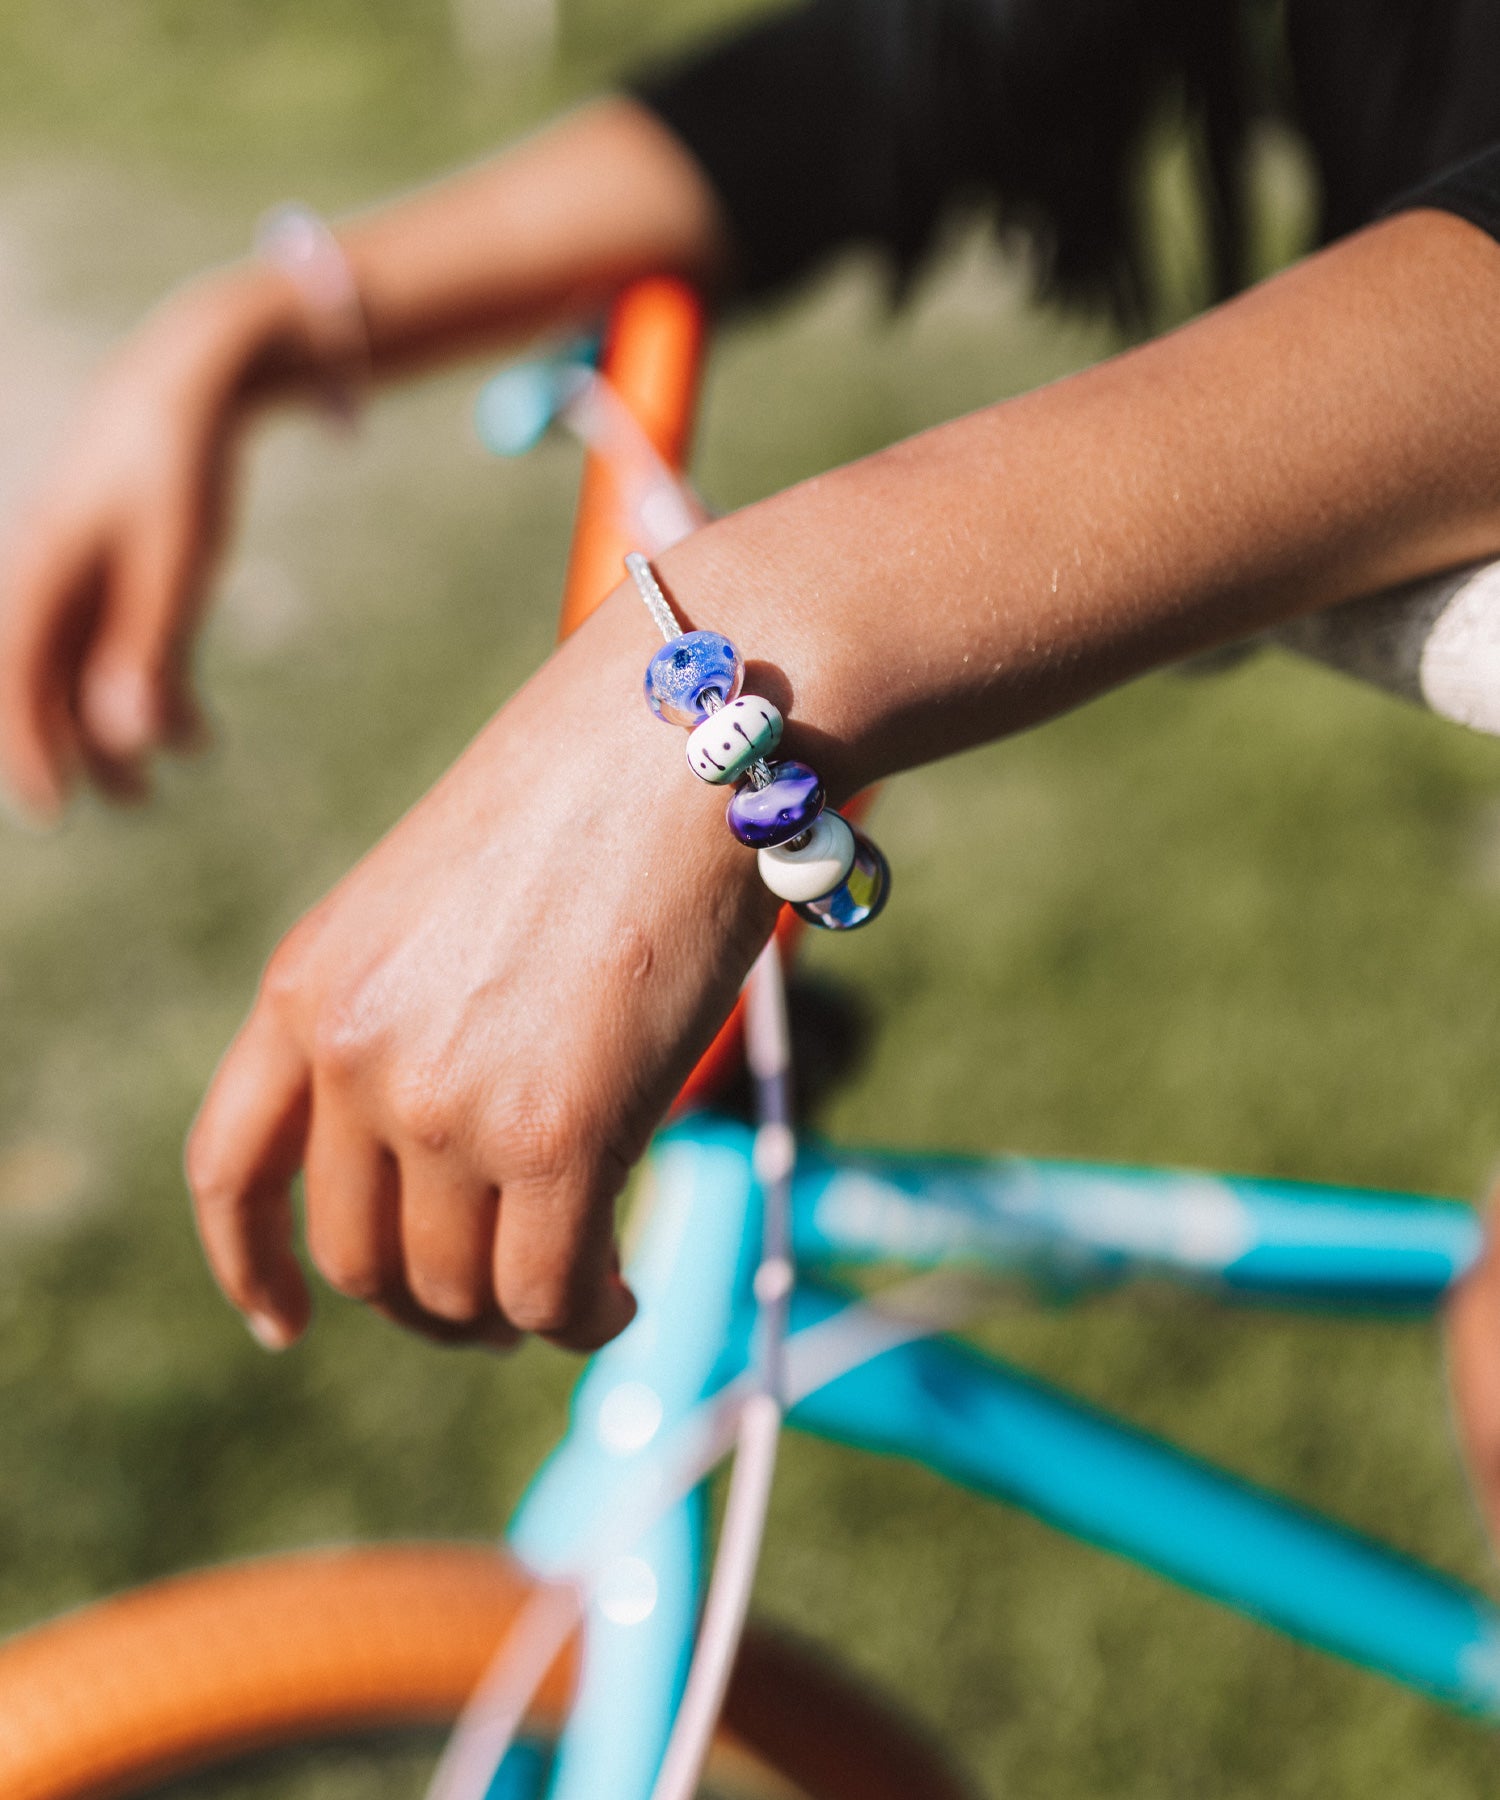 Colourful glass beads worn on sterling silver bracelet by girl on BMX bike.